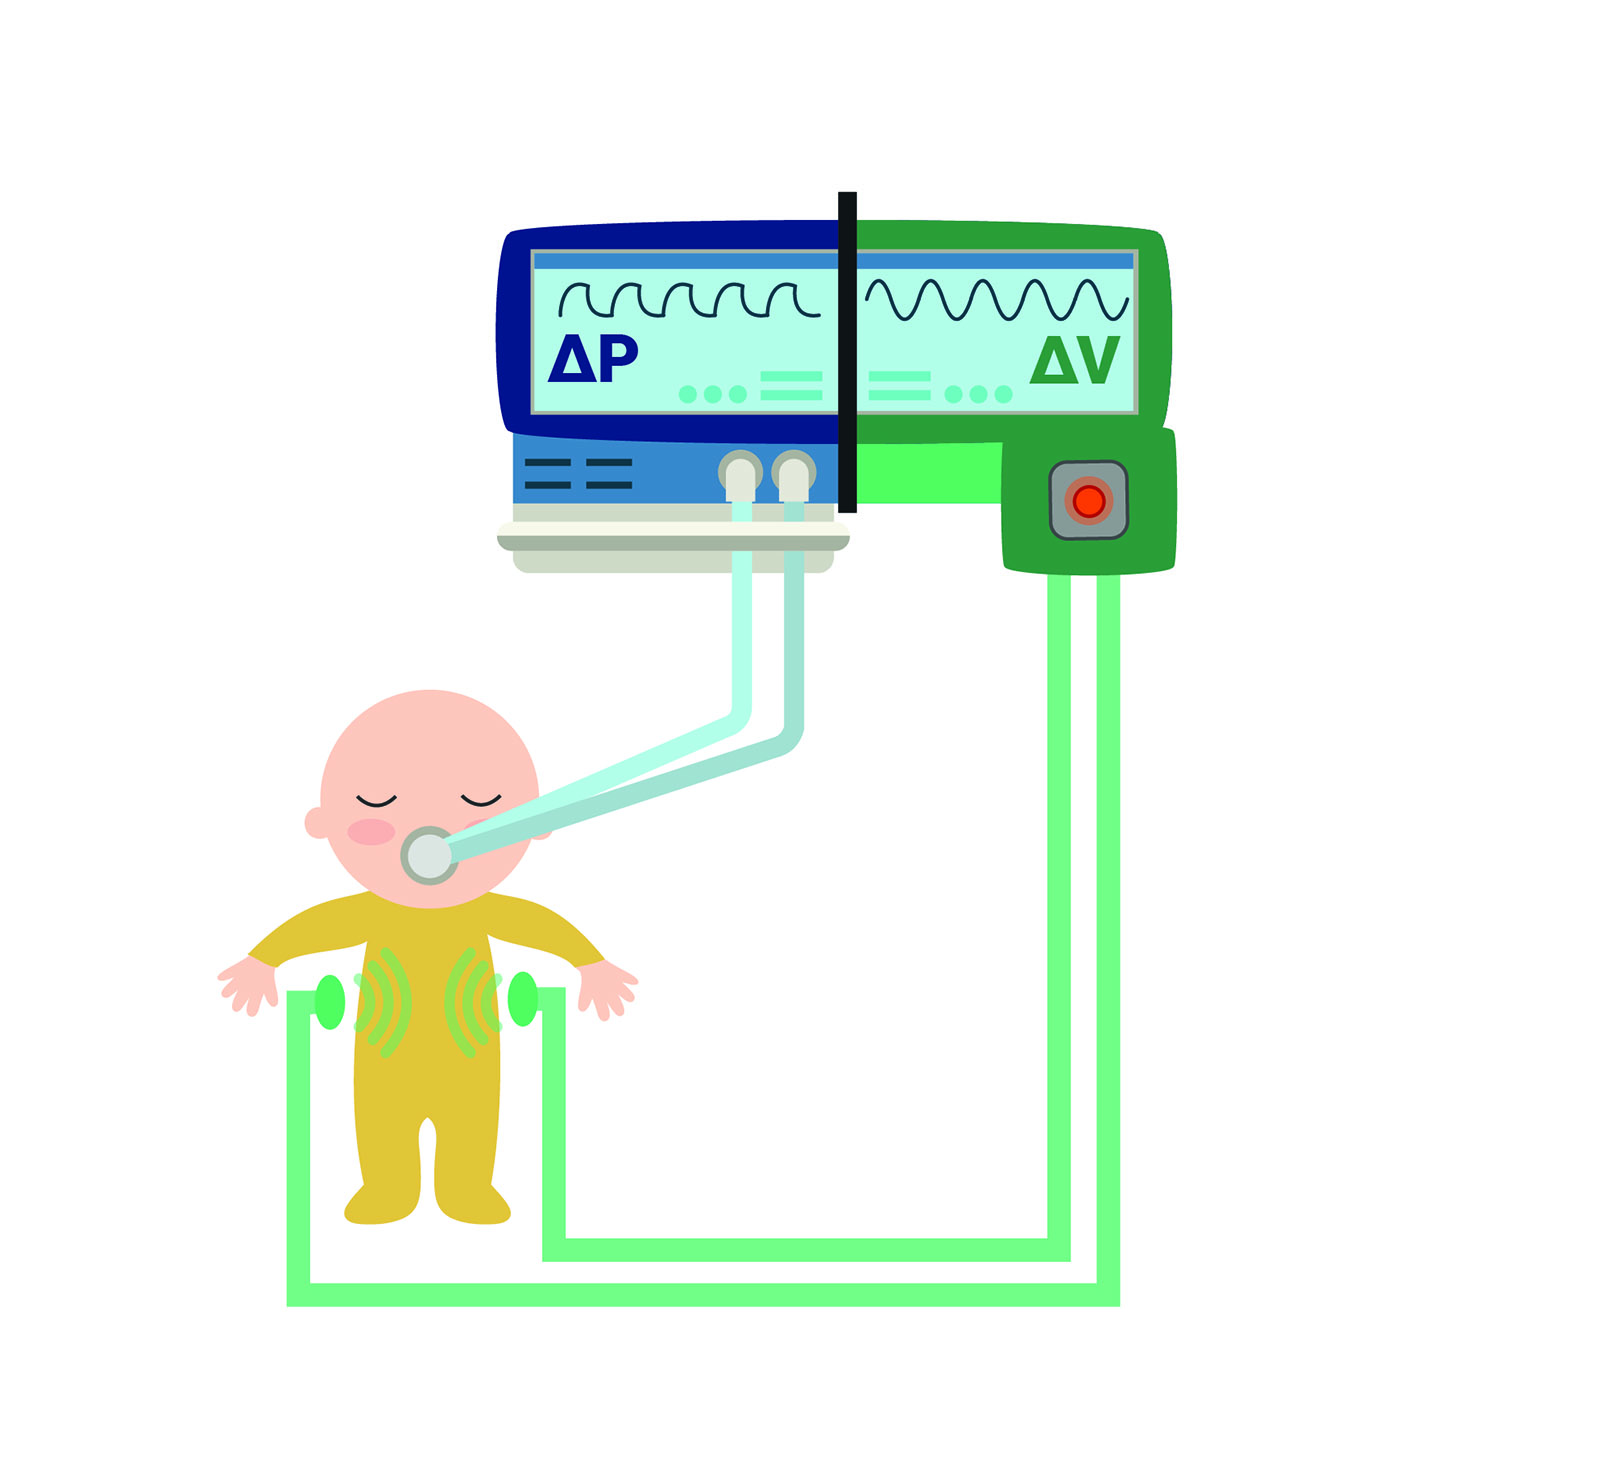 A visualization of the Thorax Monitoring system in action: The system continually monitors the premature infant’s breathing. The aim is to use the data combined with measurements from the ventilator to administer artificial respiration more efficiently, and in a way that protects the patient.